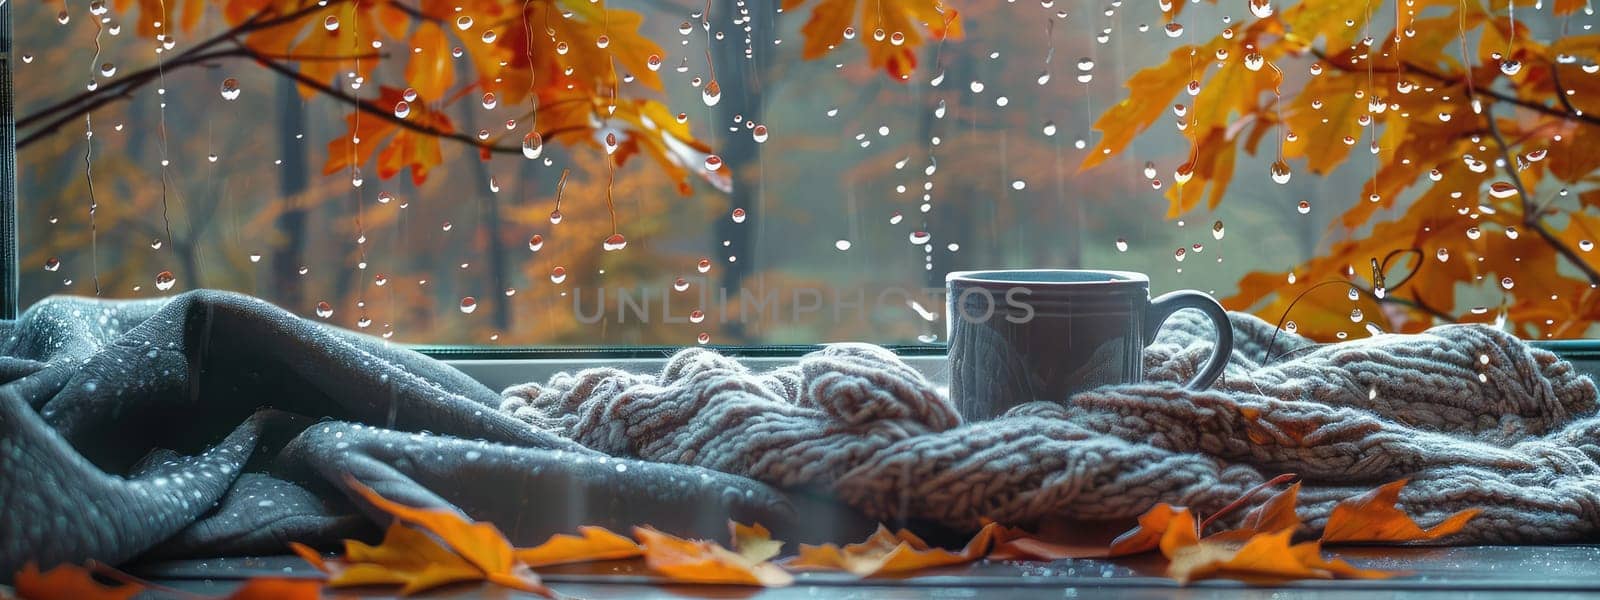 A cup of tea against the background of a wet autumn window. Selective focus. drinks.